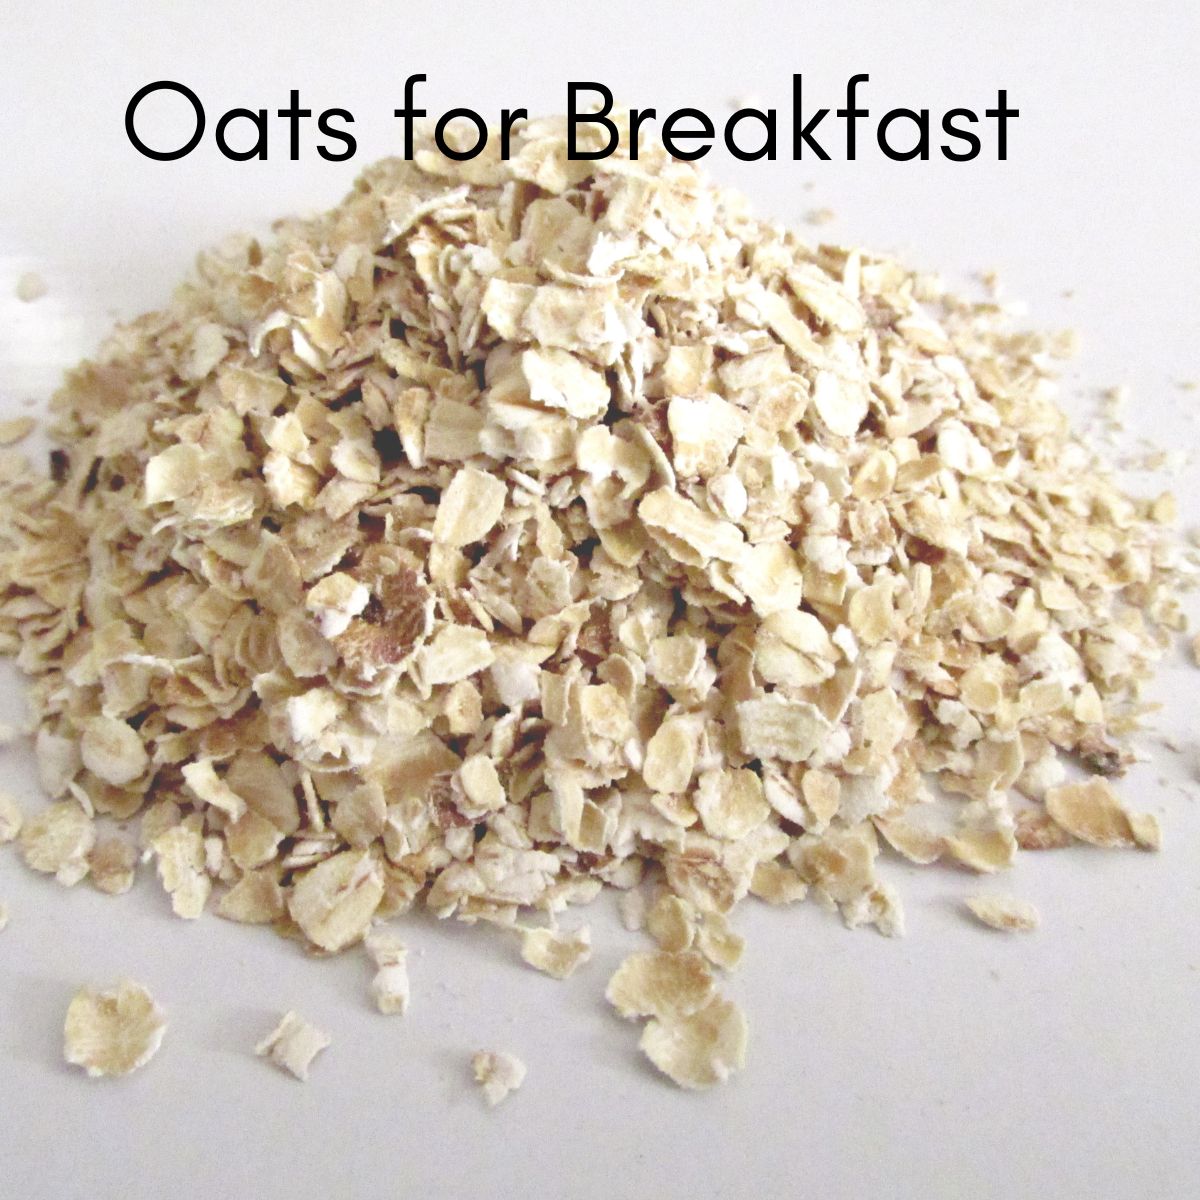 Easy Healthy Breakfast Recipes Using Oats - The Simpler Kitchen